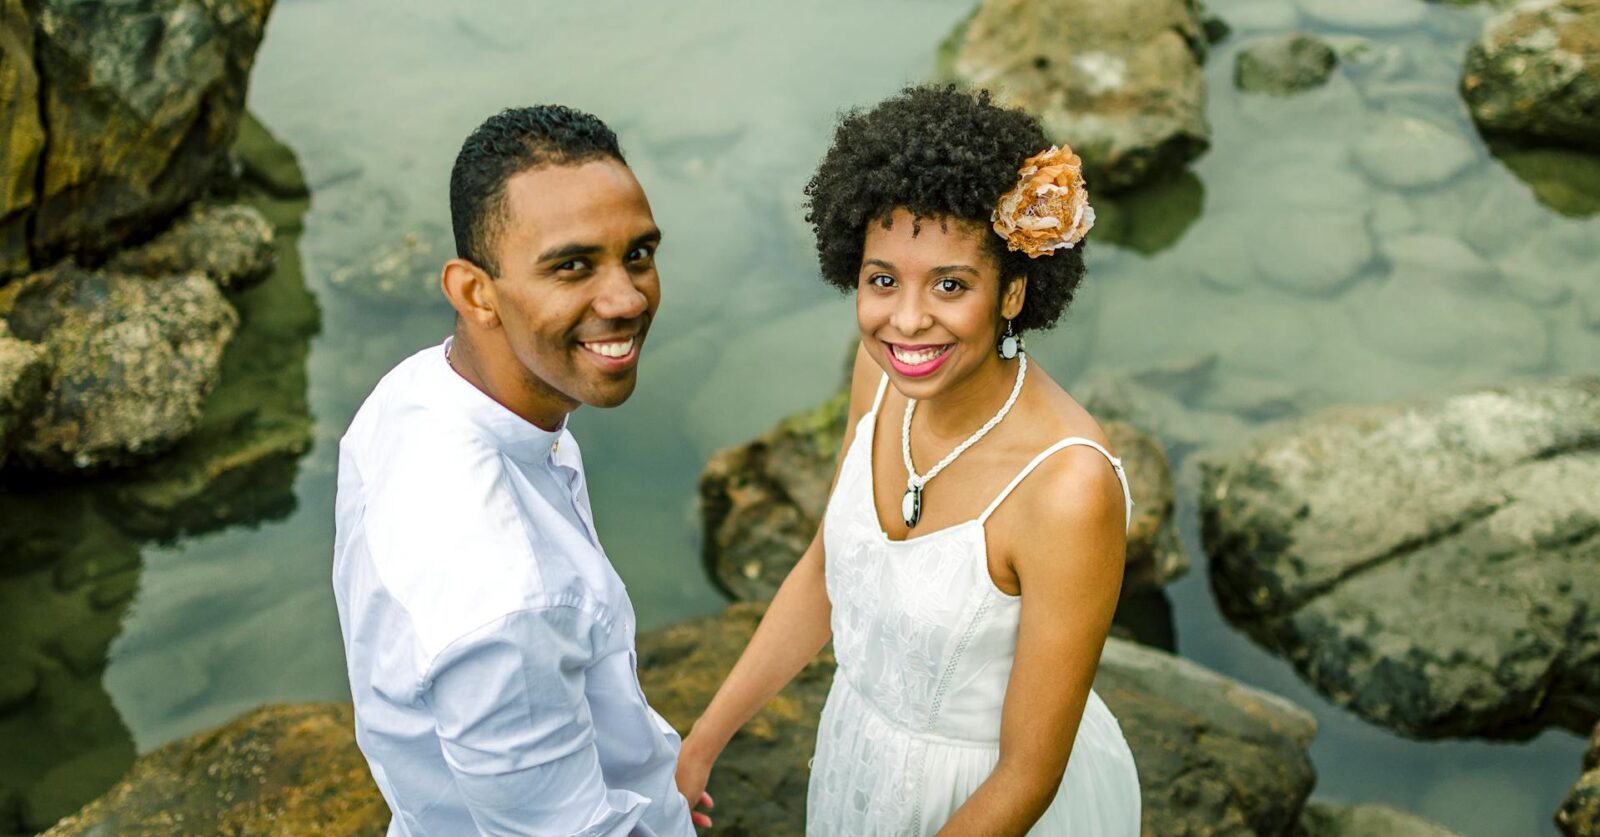 Smiling couple in white holding hands